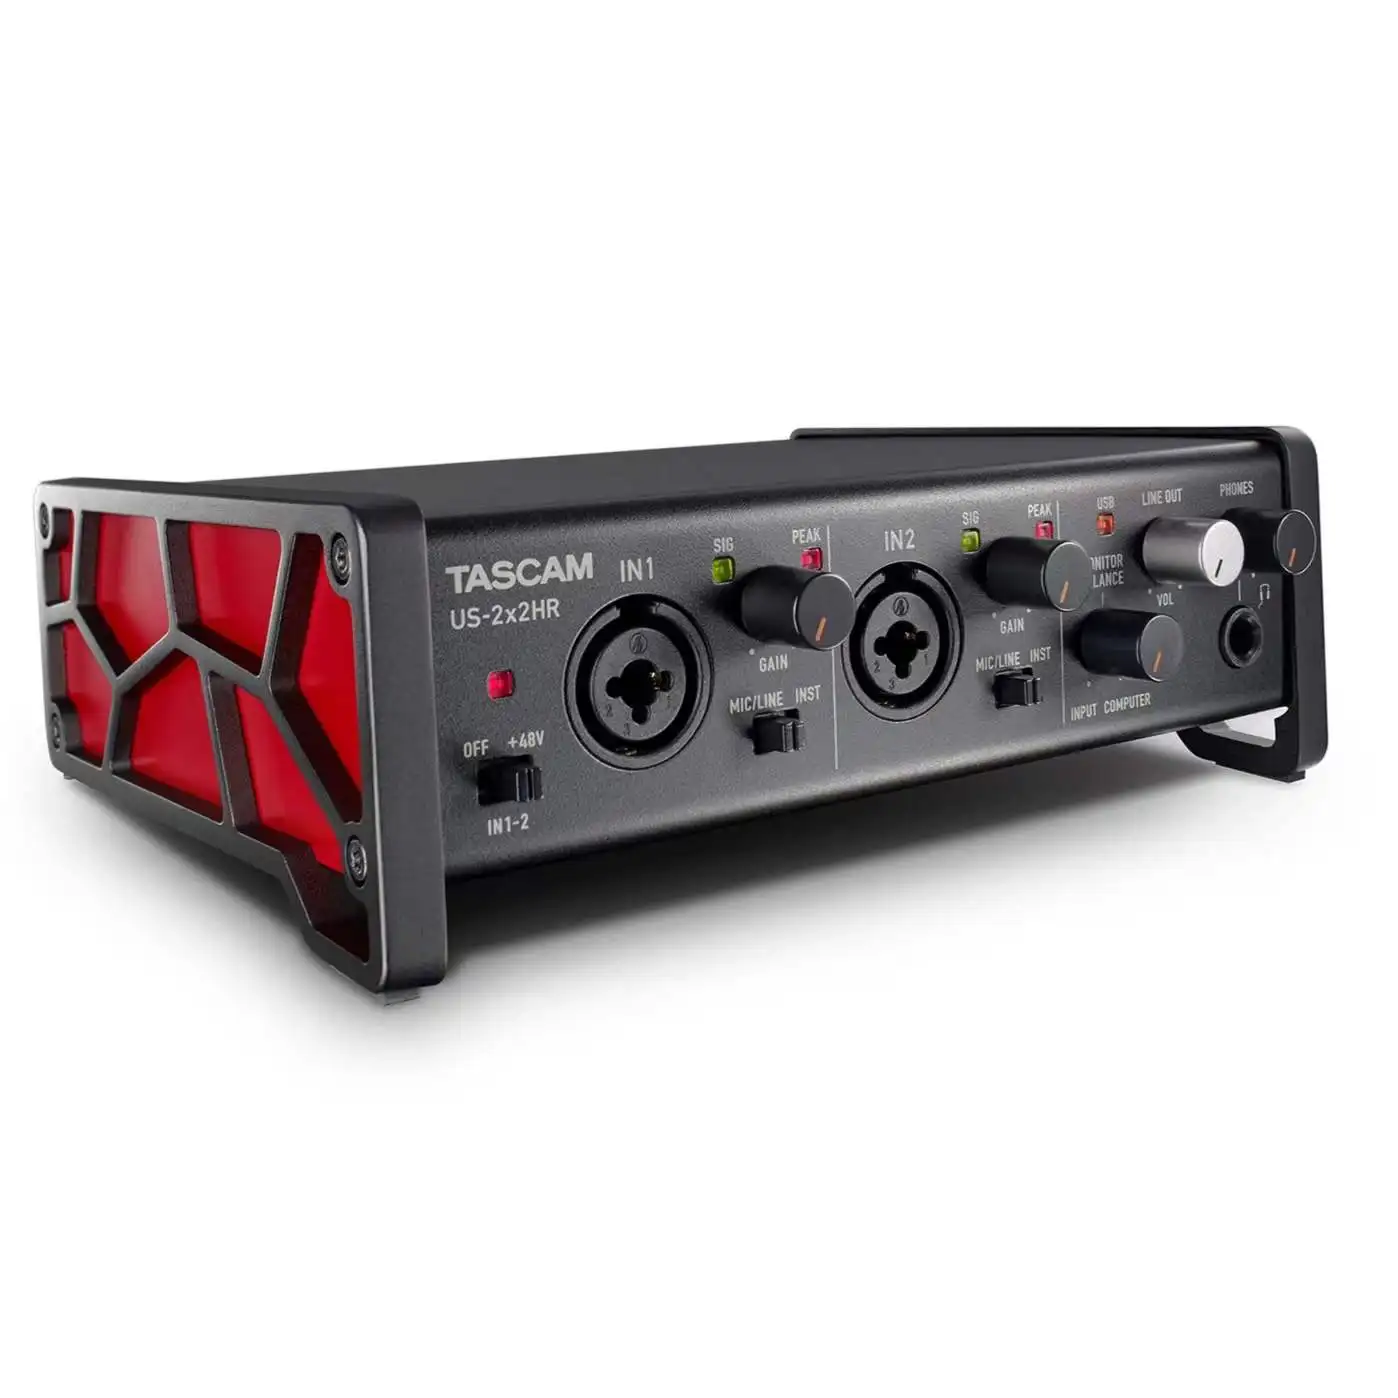 Tascam us-2x2 HR us-2x2HR high resolution multi-functional USB audio  interface 2 in/2 out MIDI interface IOS sound card